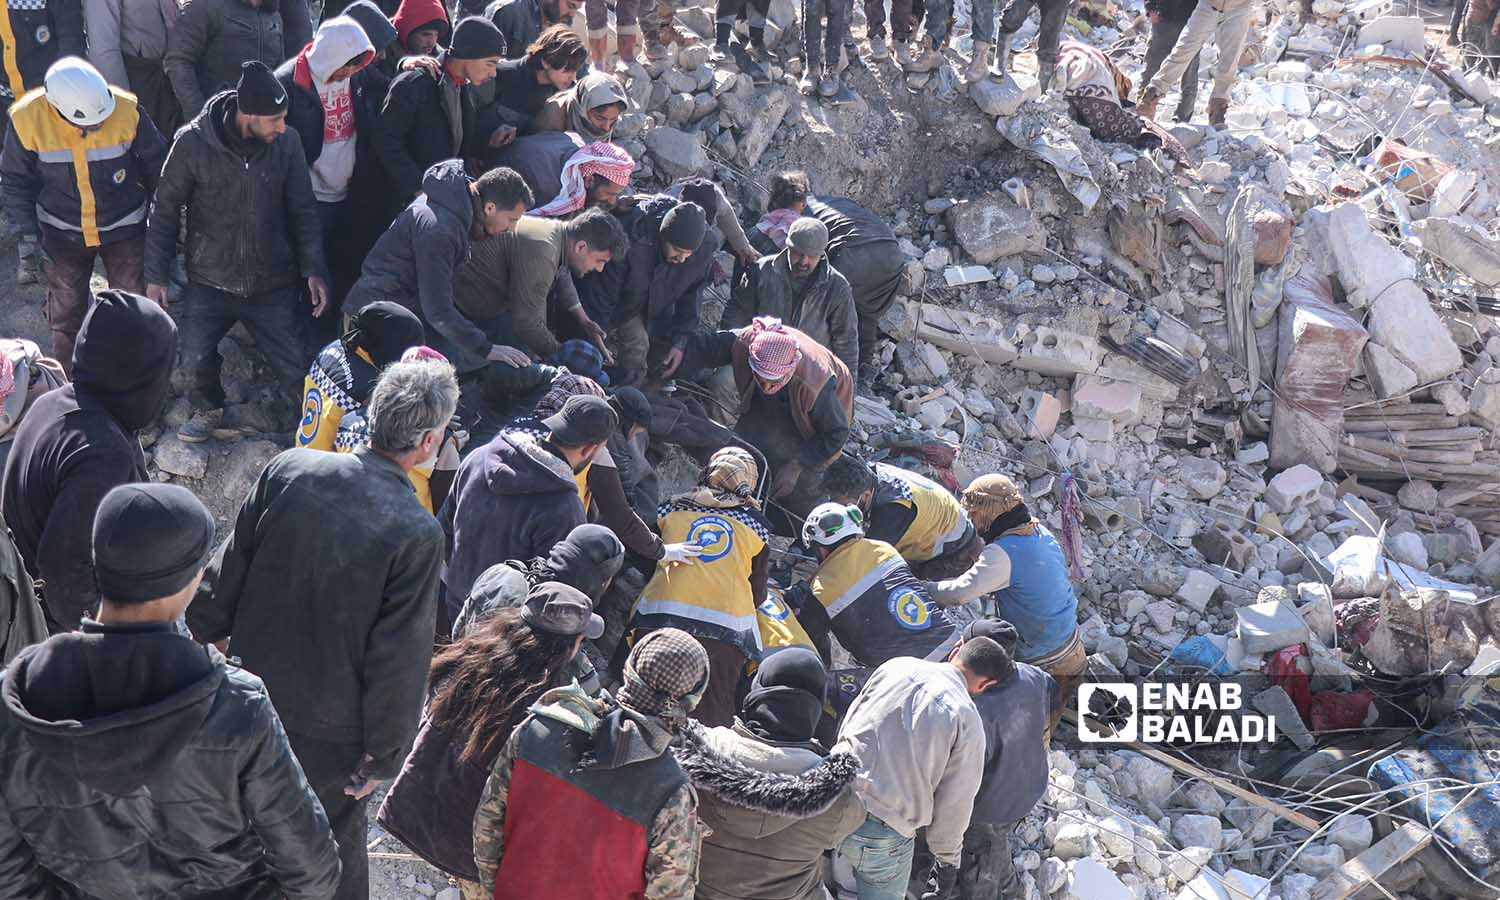 Syria Civil Defense teams and volunteer residents continue rescue operations for victims and survivors under the rubble of collapsed buildings following an earthquake that struck areas in northwestern Syria, in the village of Basniya, near the border town of Harem - February 7, 2023 (Enab Baladi/Mohammad Nasan Dabel)